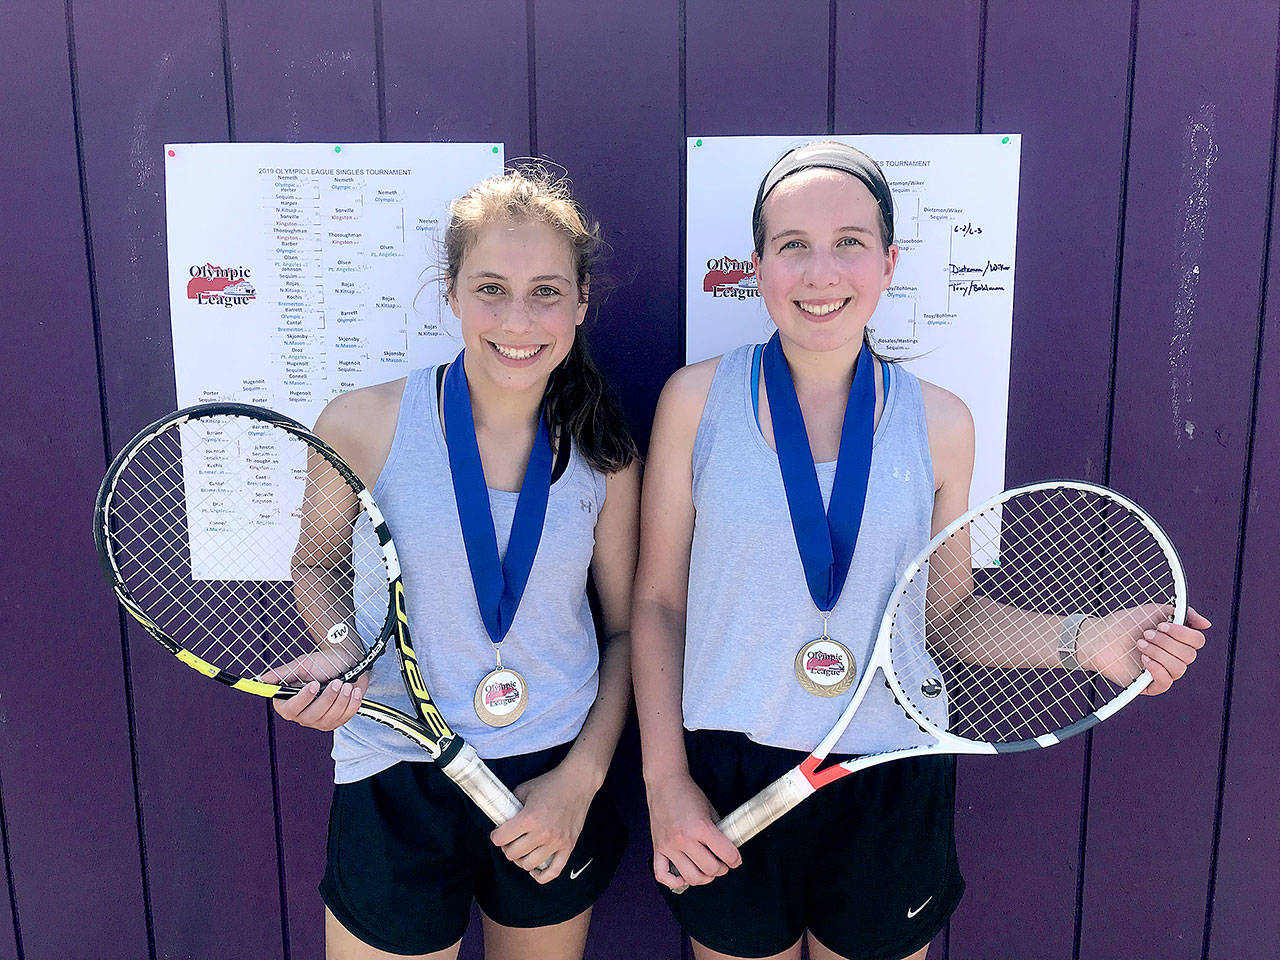 Jessica Dietzman, left, and Kalli Wiker, right, won their second straight Olympic League 2A doubles’ championship this weekend. The Sequim duo won four straight matches en route to the league title in Bremerton.